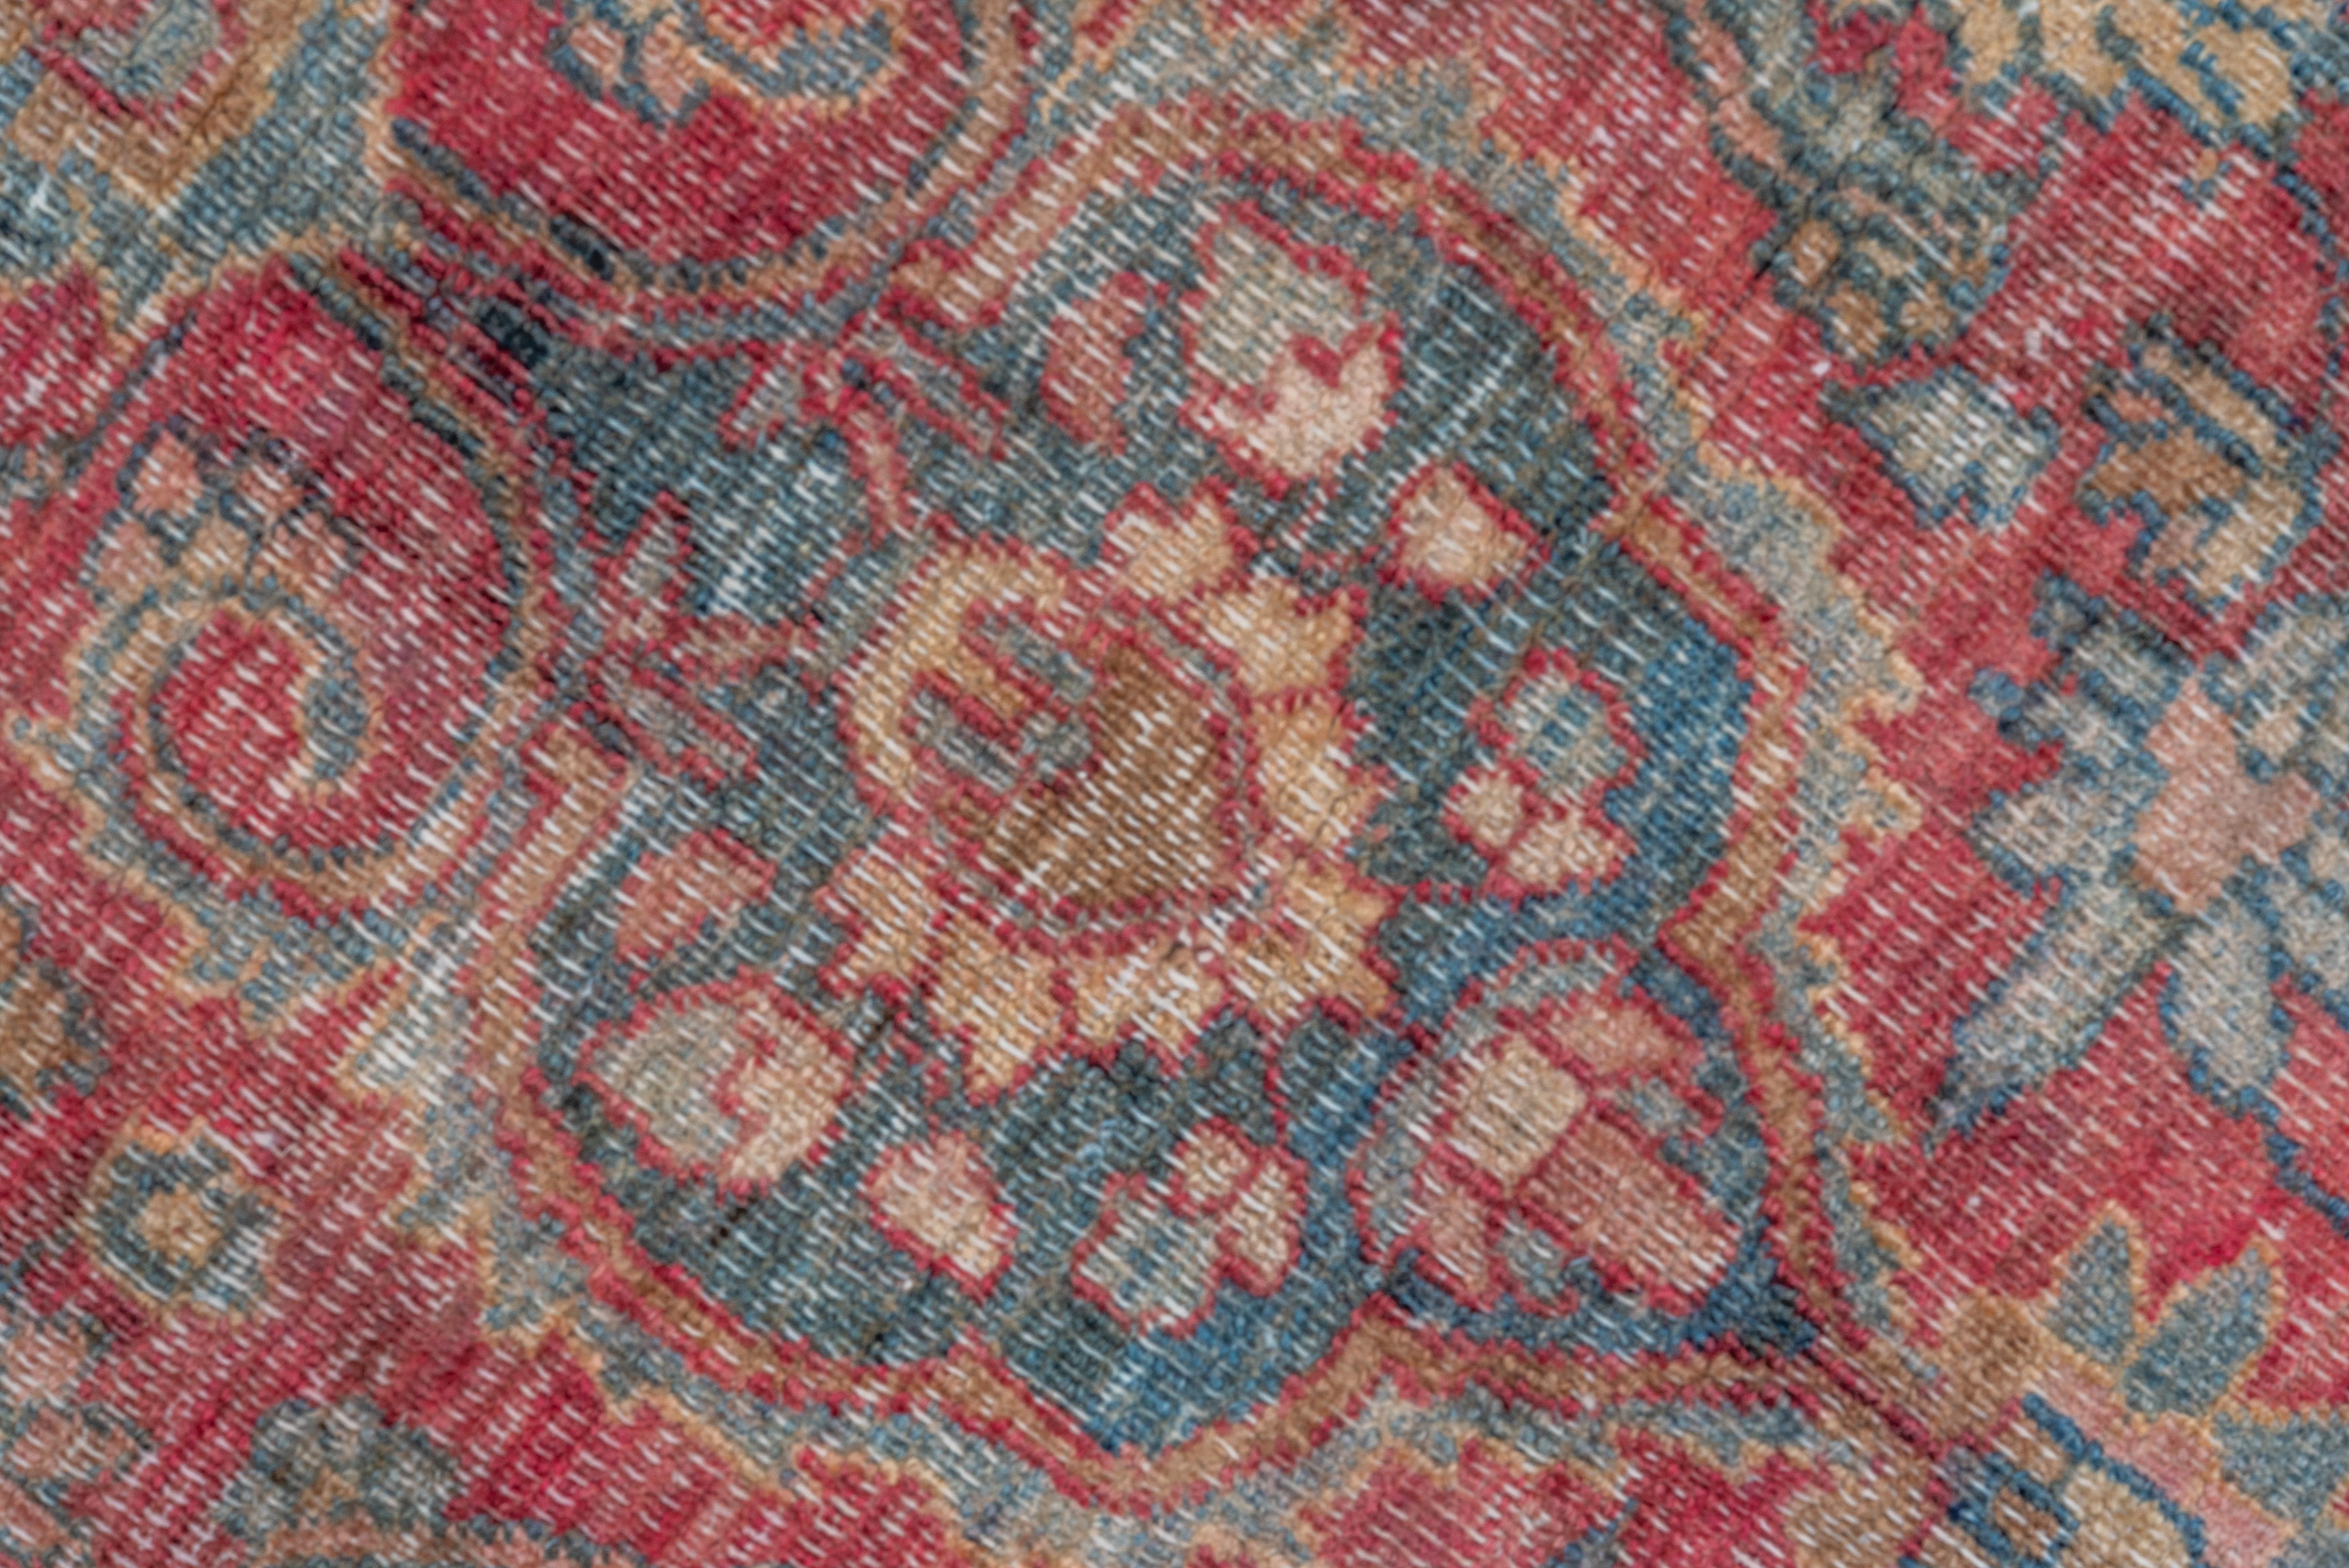 Shabby Chic Persian Khorassan Rug with Pink & Teal Tones, Circa 1930s For Sale 2